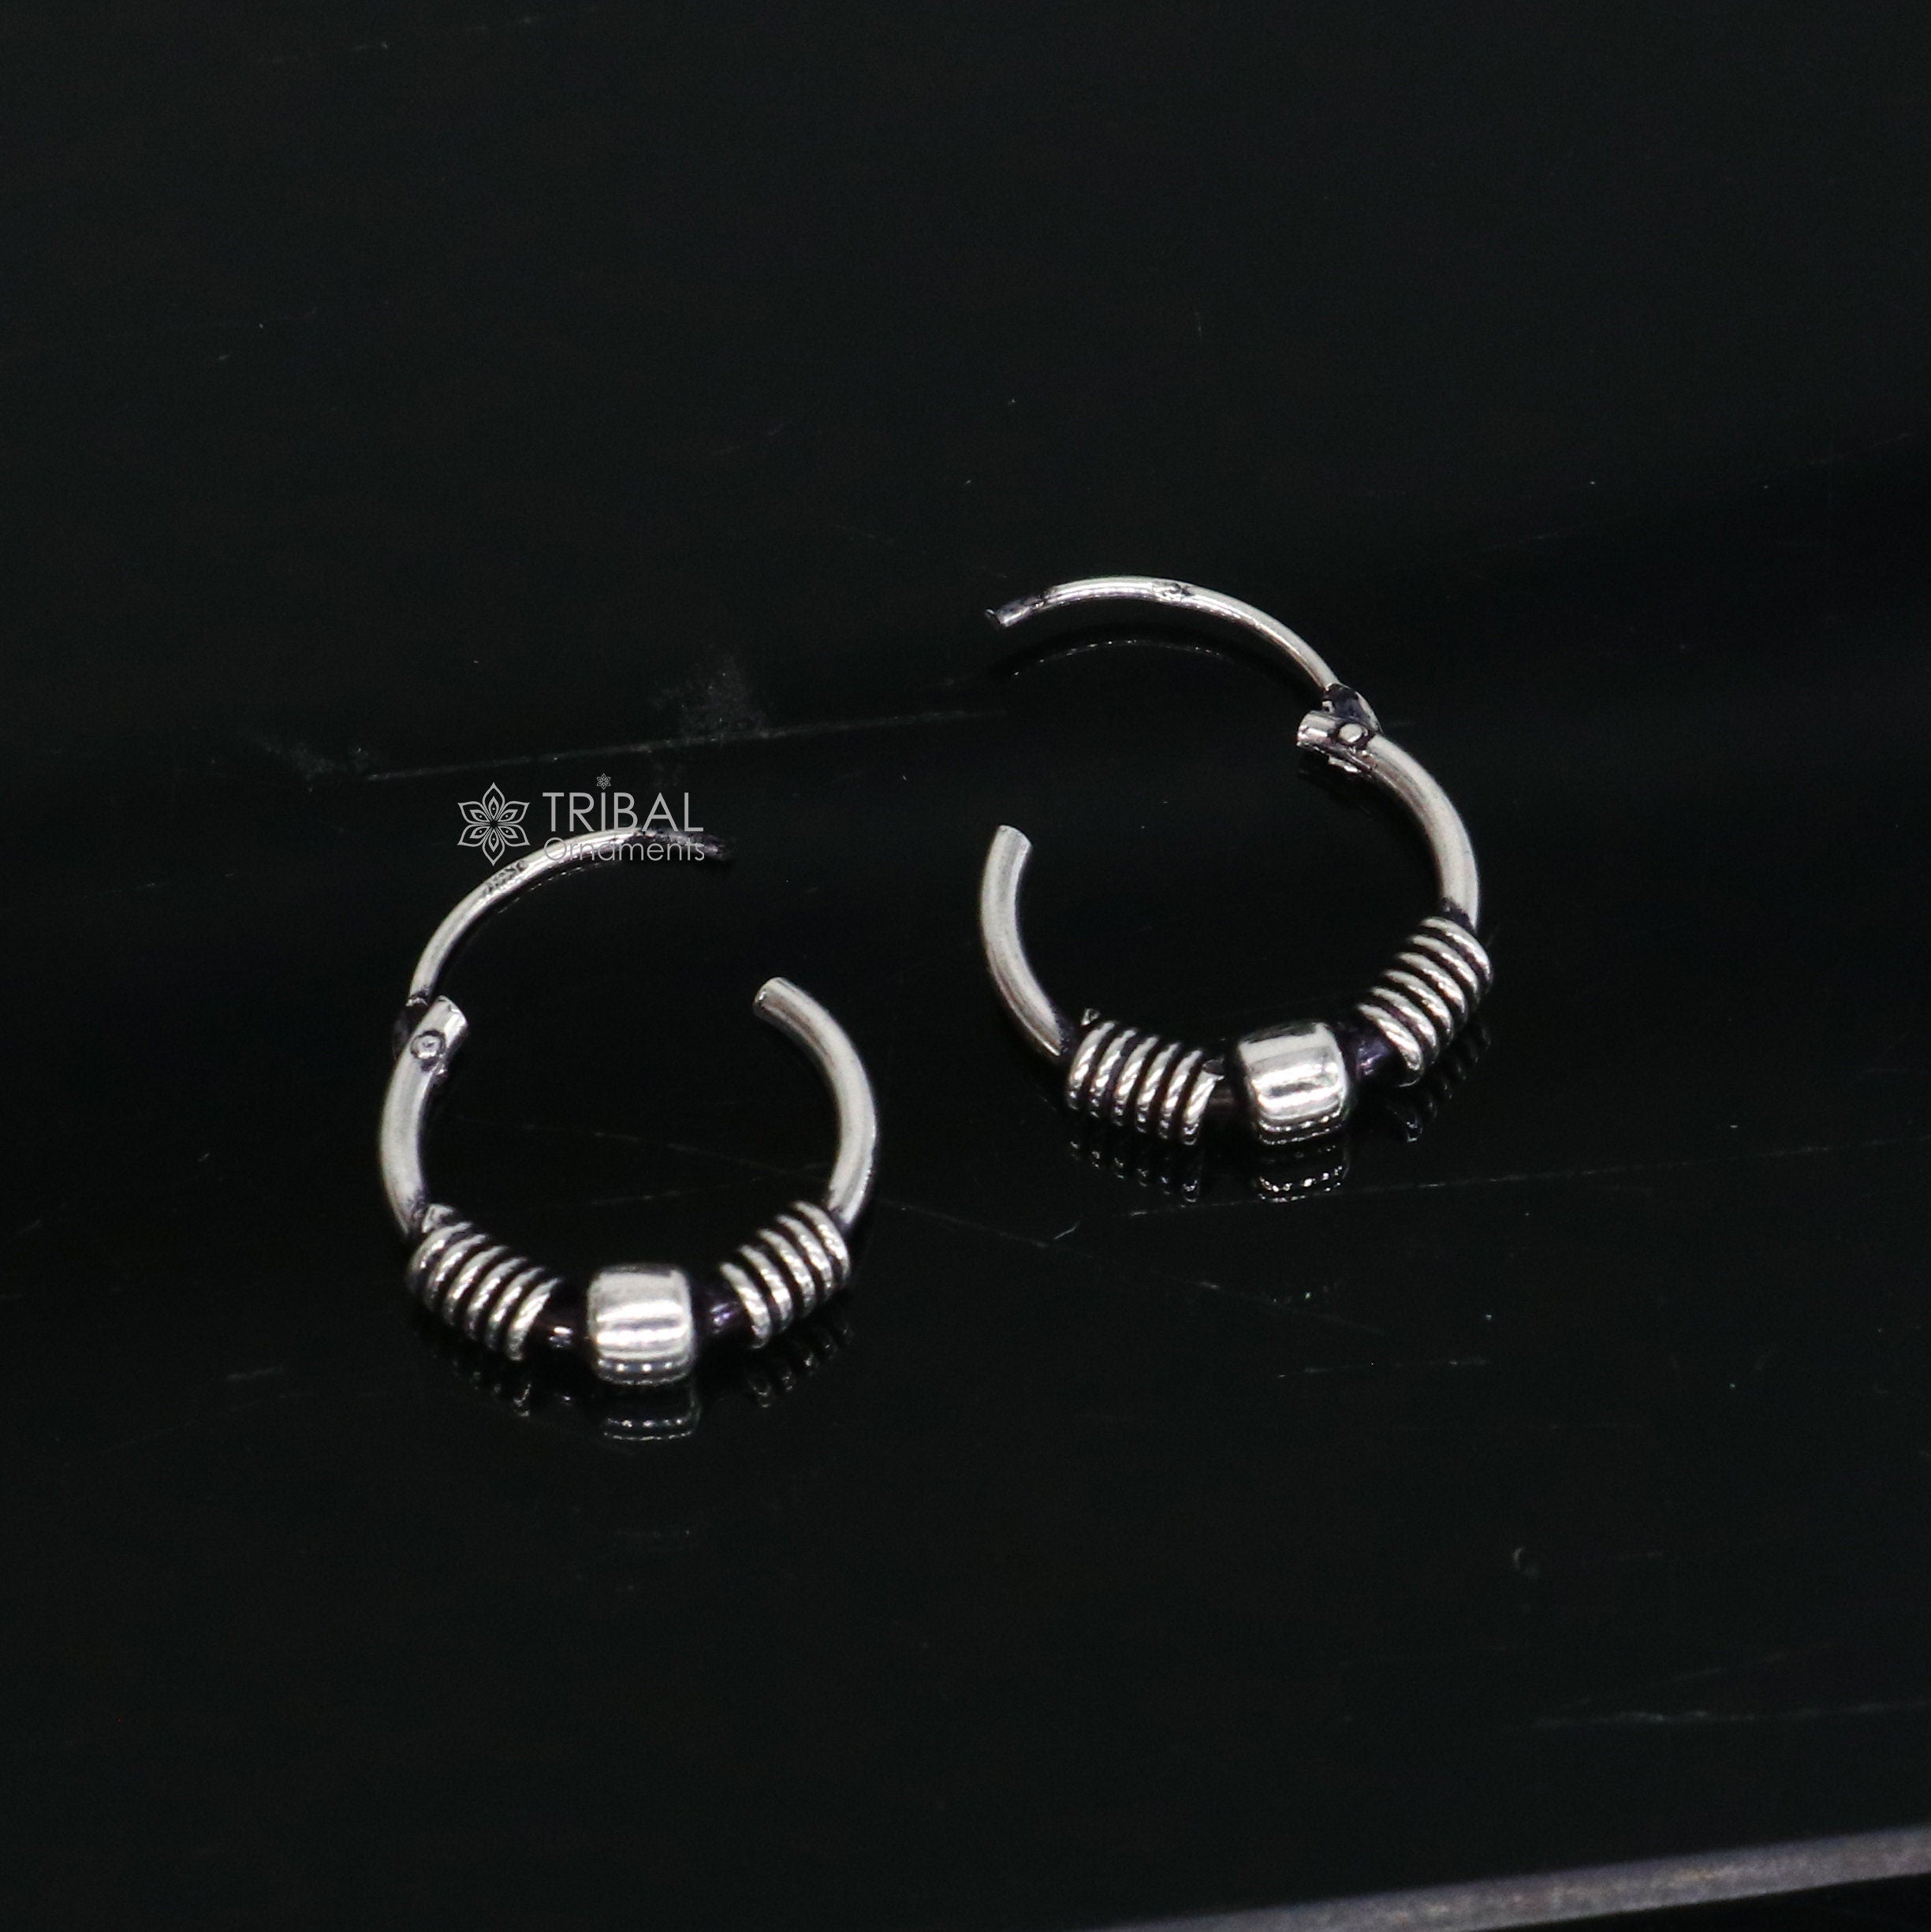 Vintage traditional design stylish 925 sterling silver handmade fabulous  hoops earrings bali , pretty gifting bali tribal jewelry india s612 |  TRIBAL ORNAMENTS